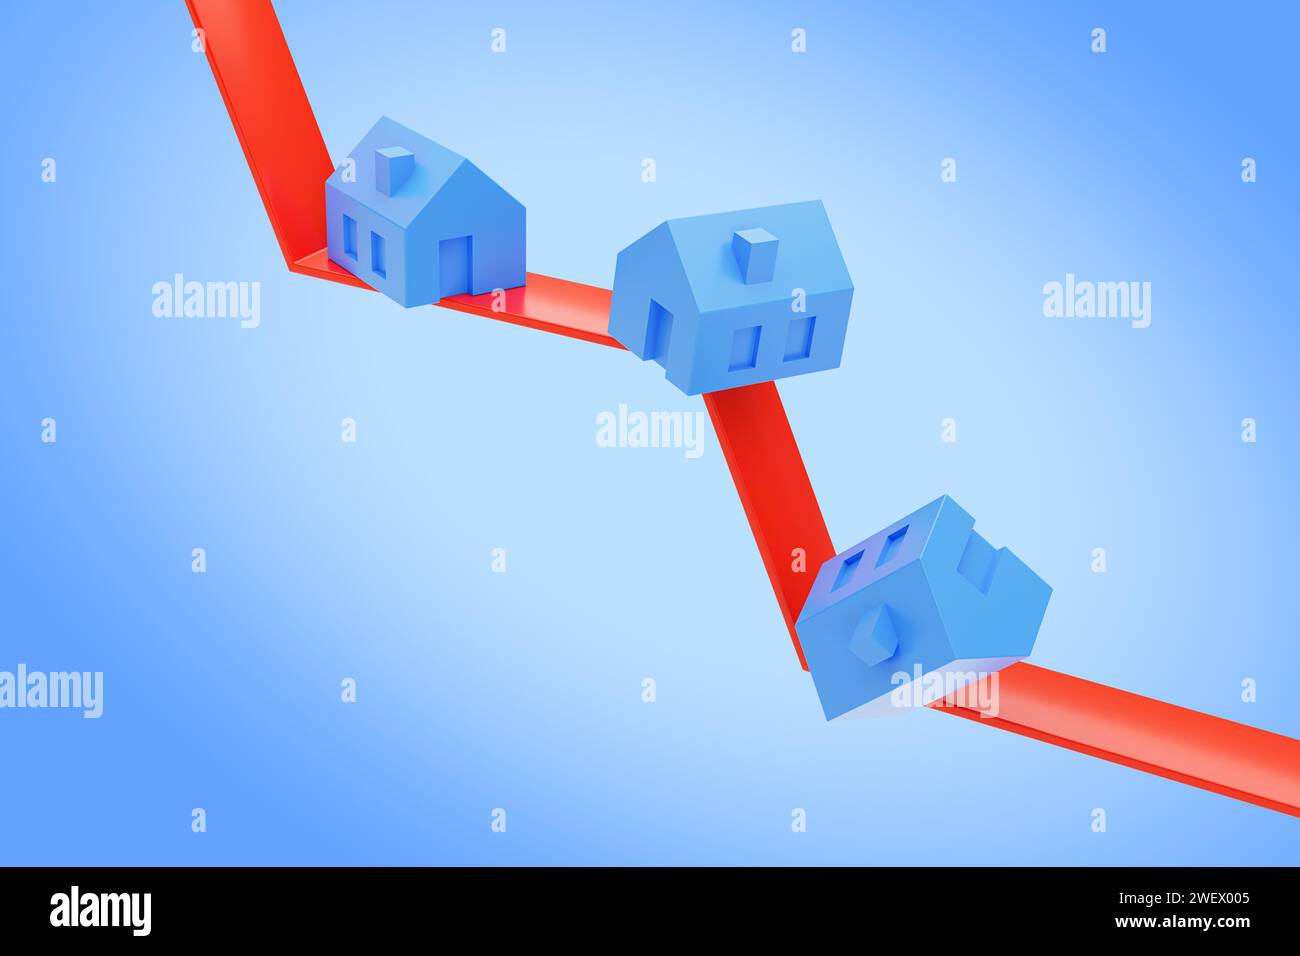 Falling real estate prices concept. several blue houses tumbling on a downward pointing red line. Blue gradient background Stock Photo